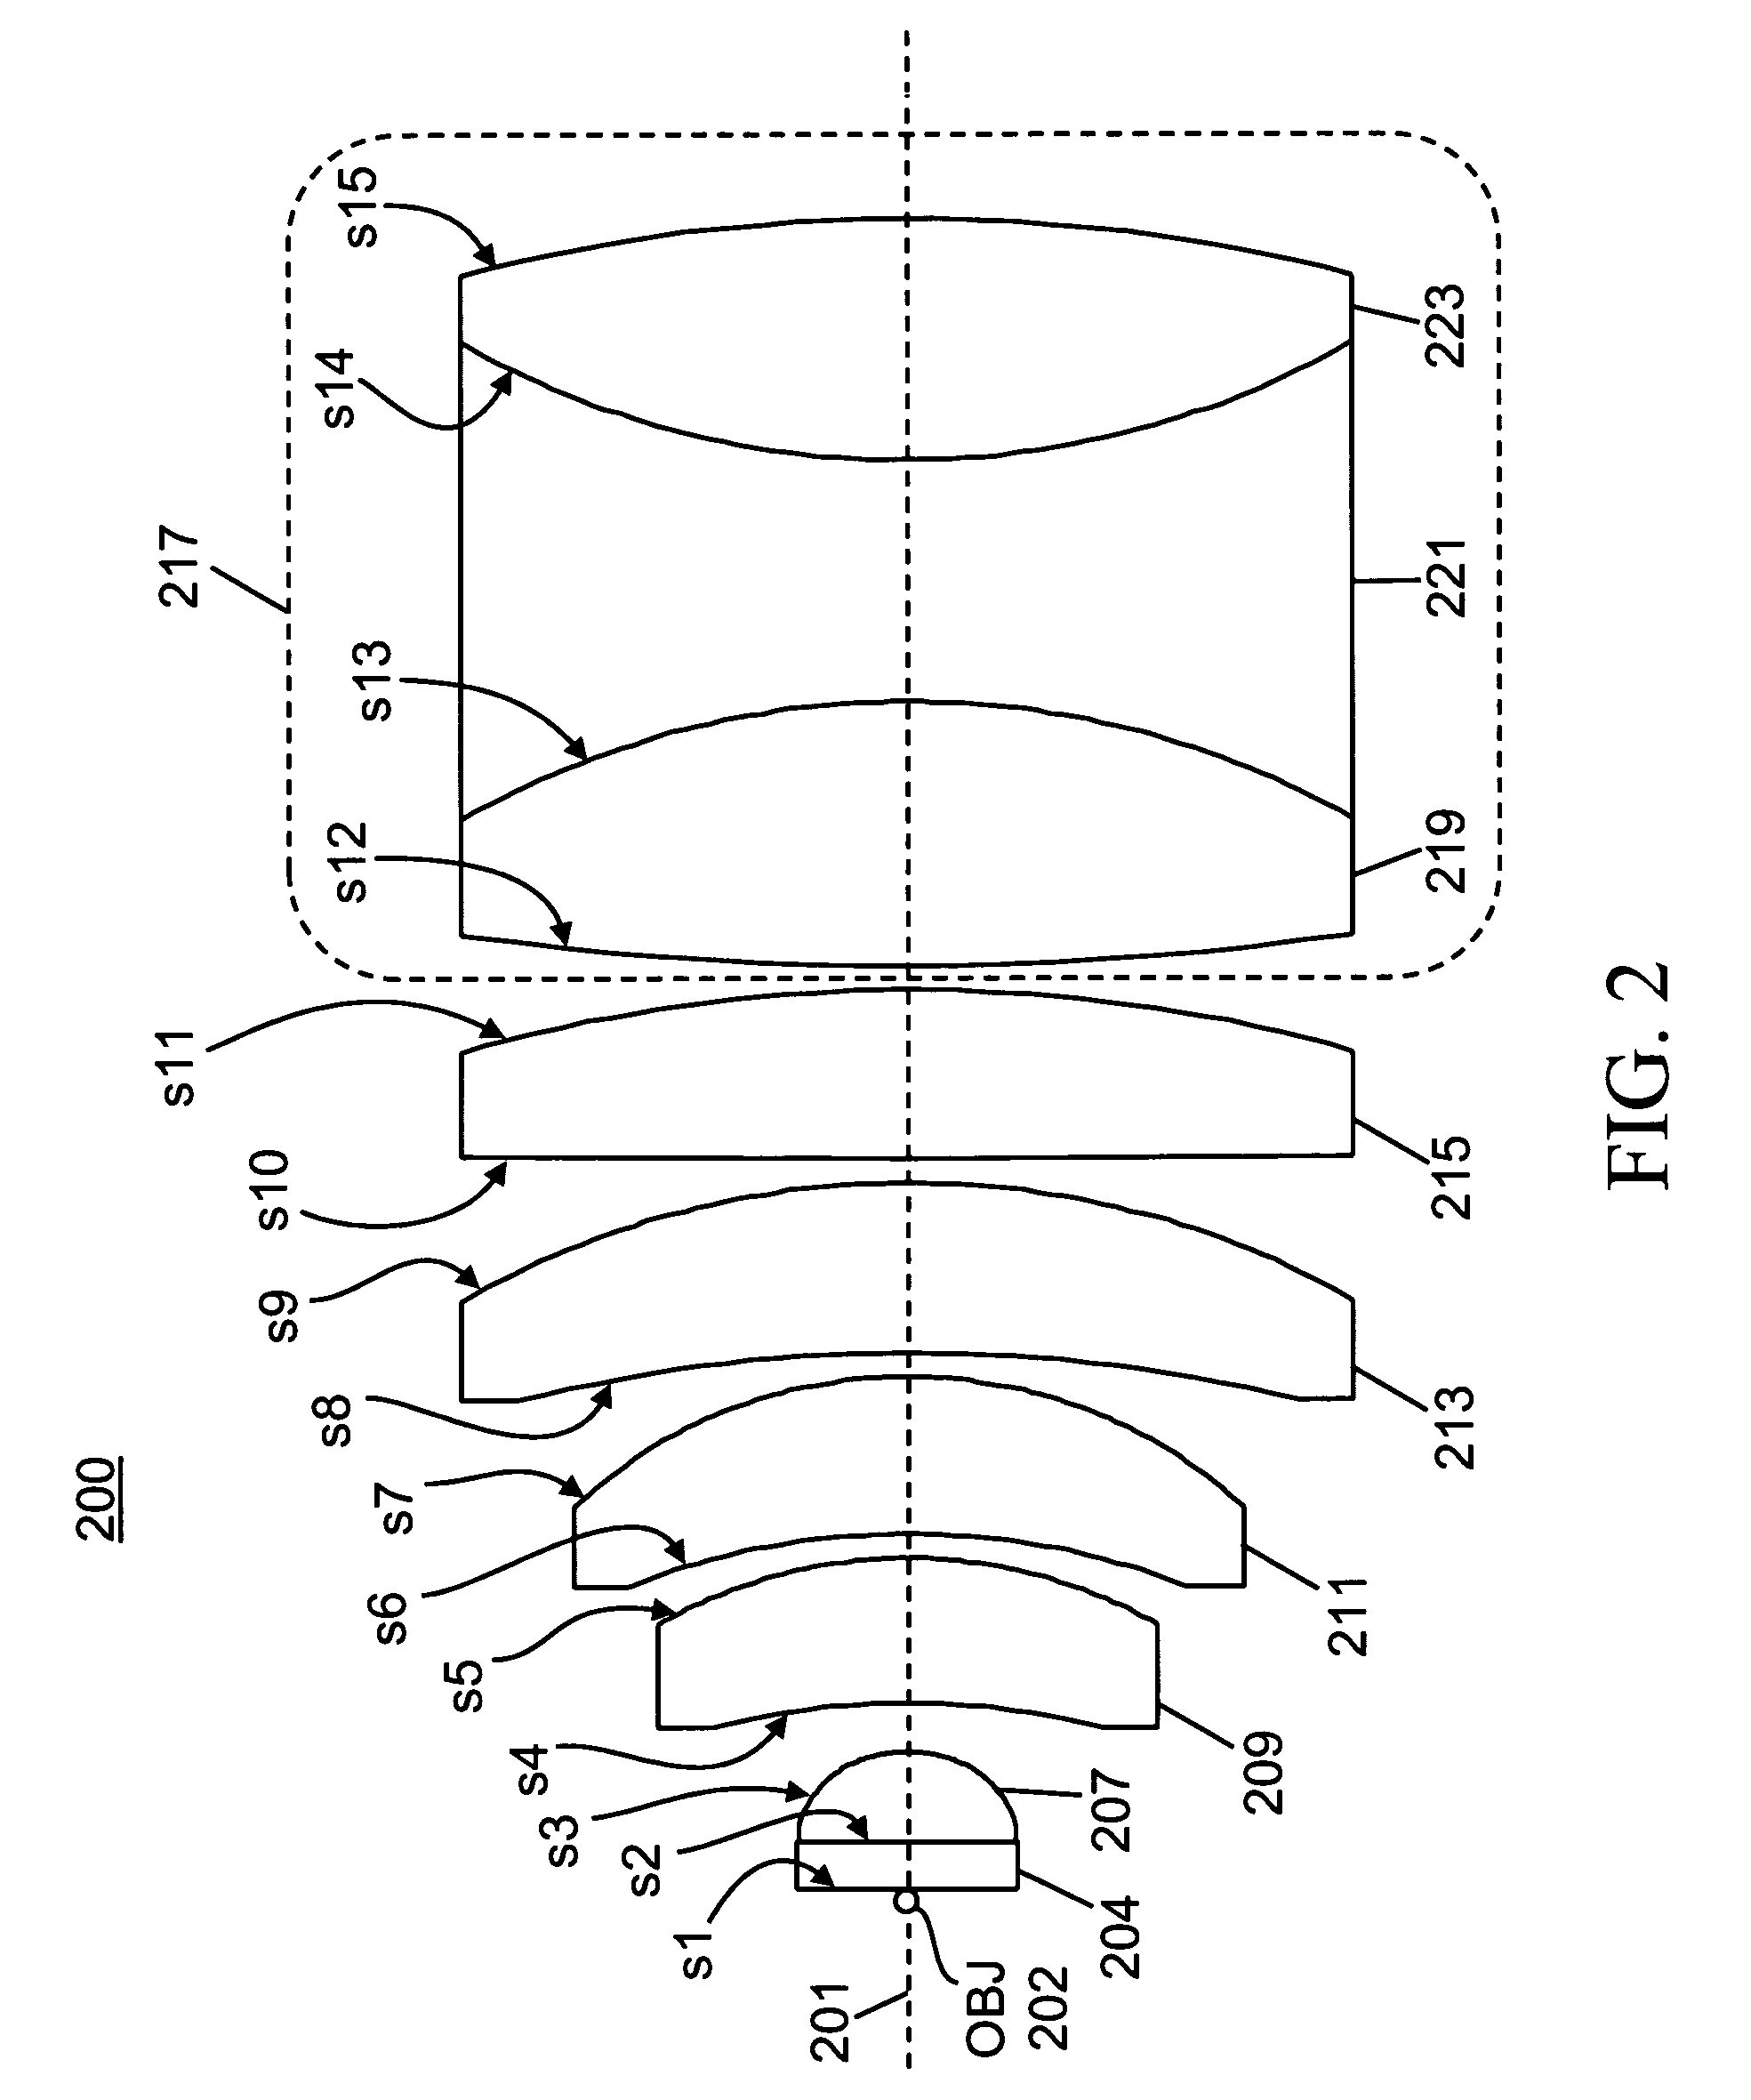 System and method for a composite lens for a flow cytometer